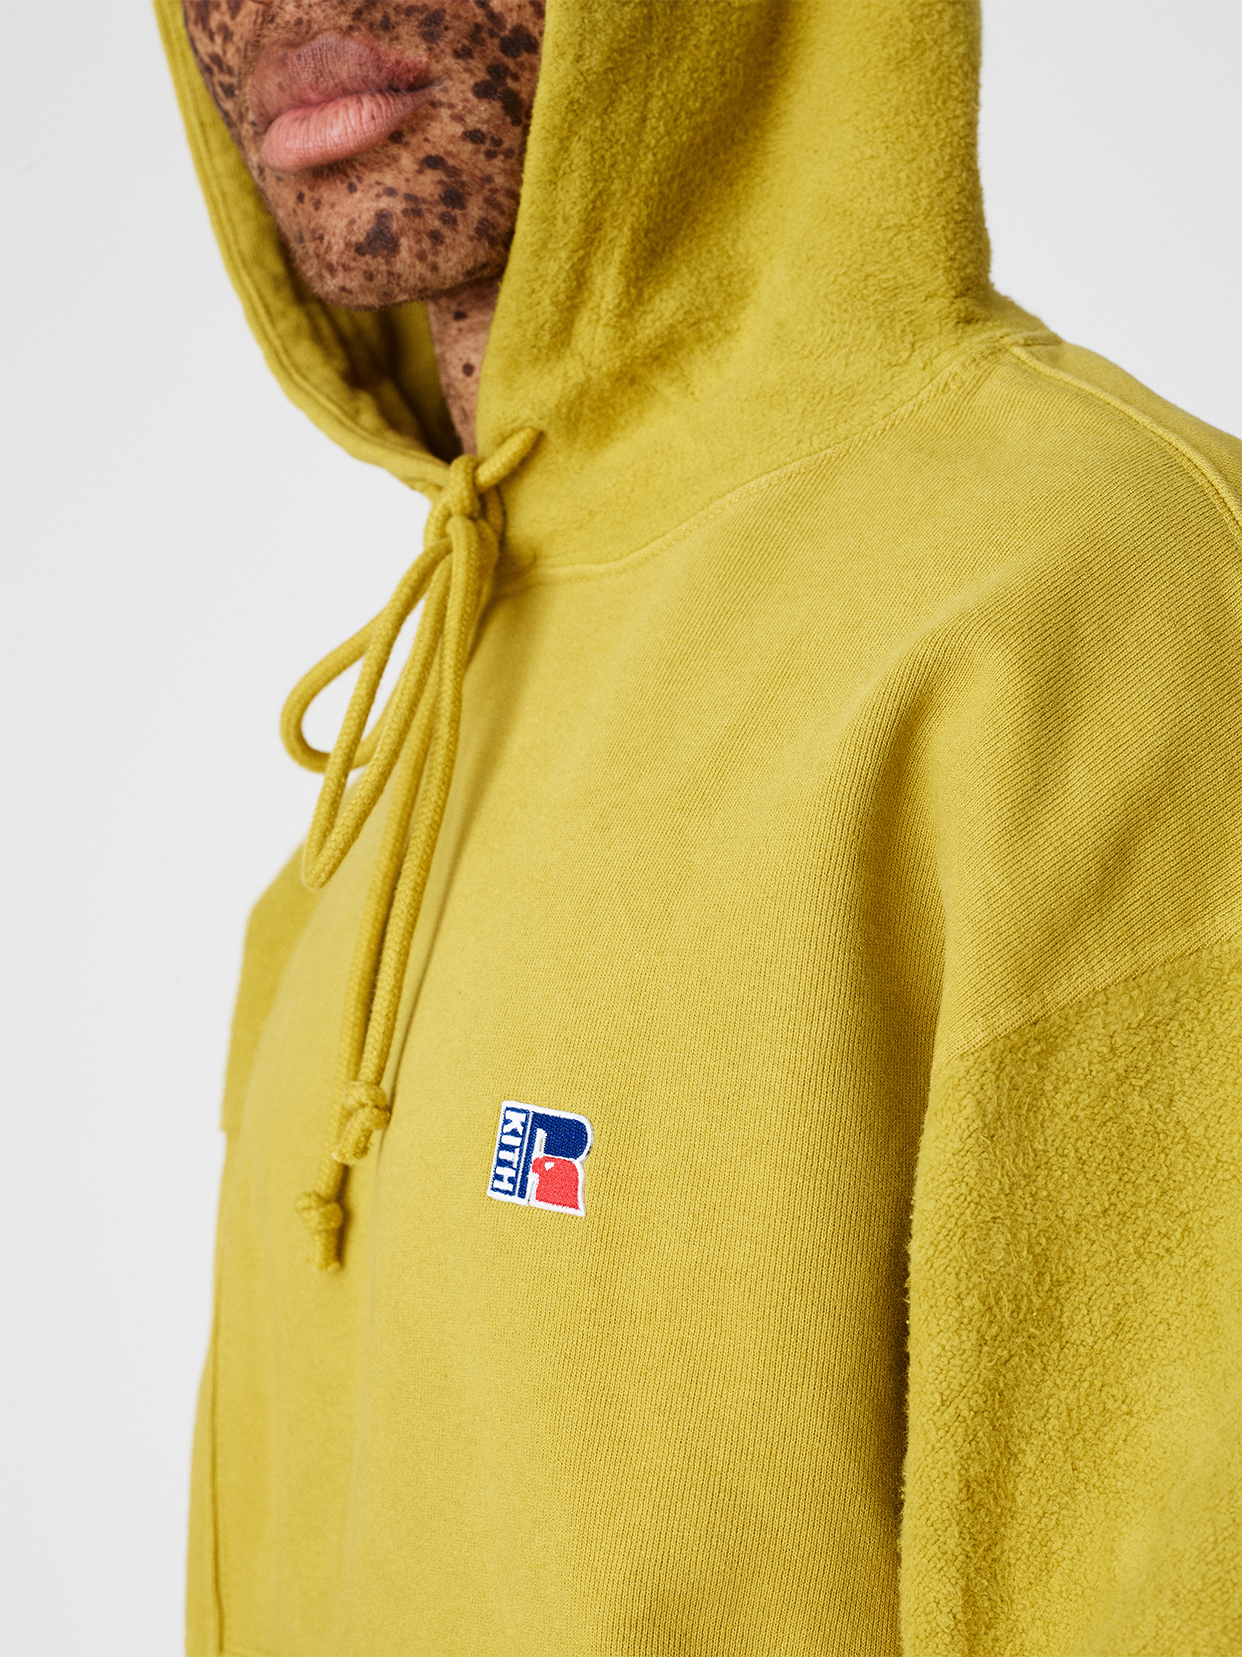 KITH Taps Russell Athletic For a Colorful Capsule Collection | The 